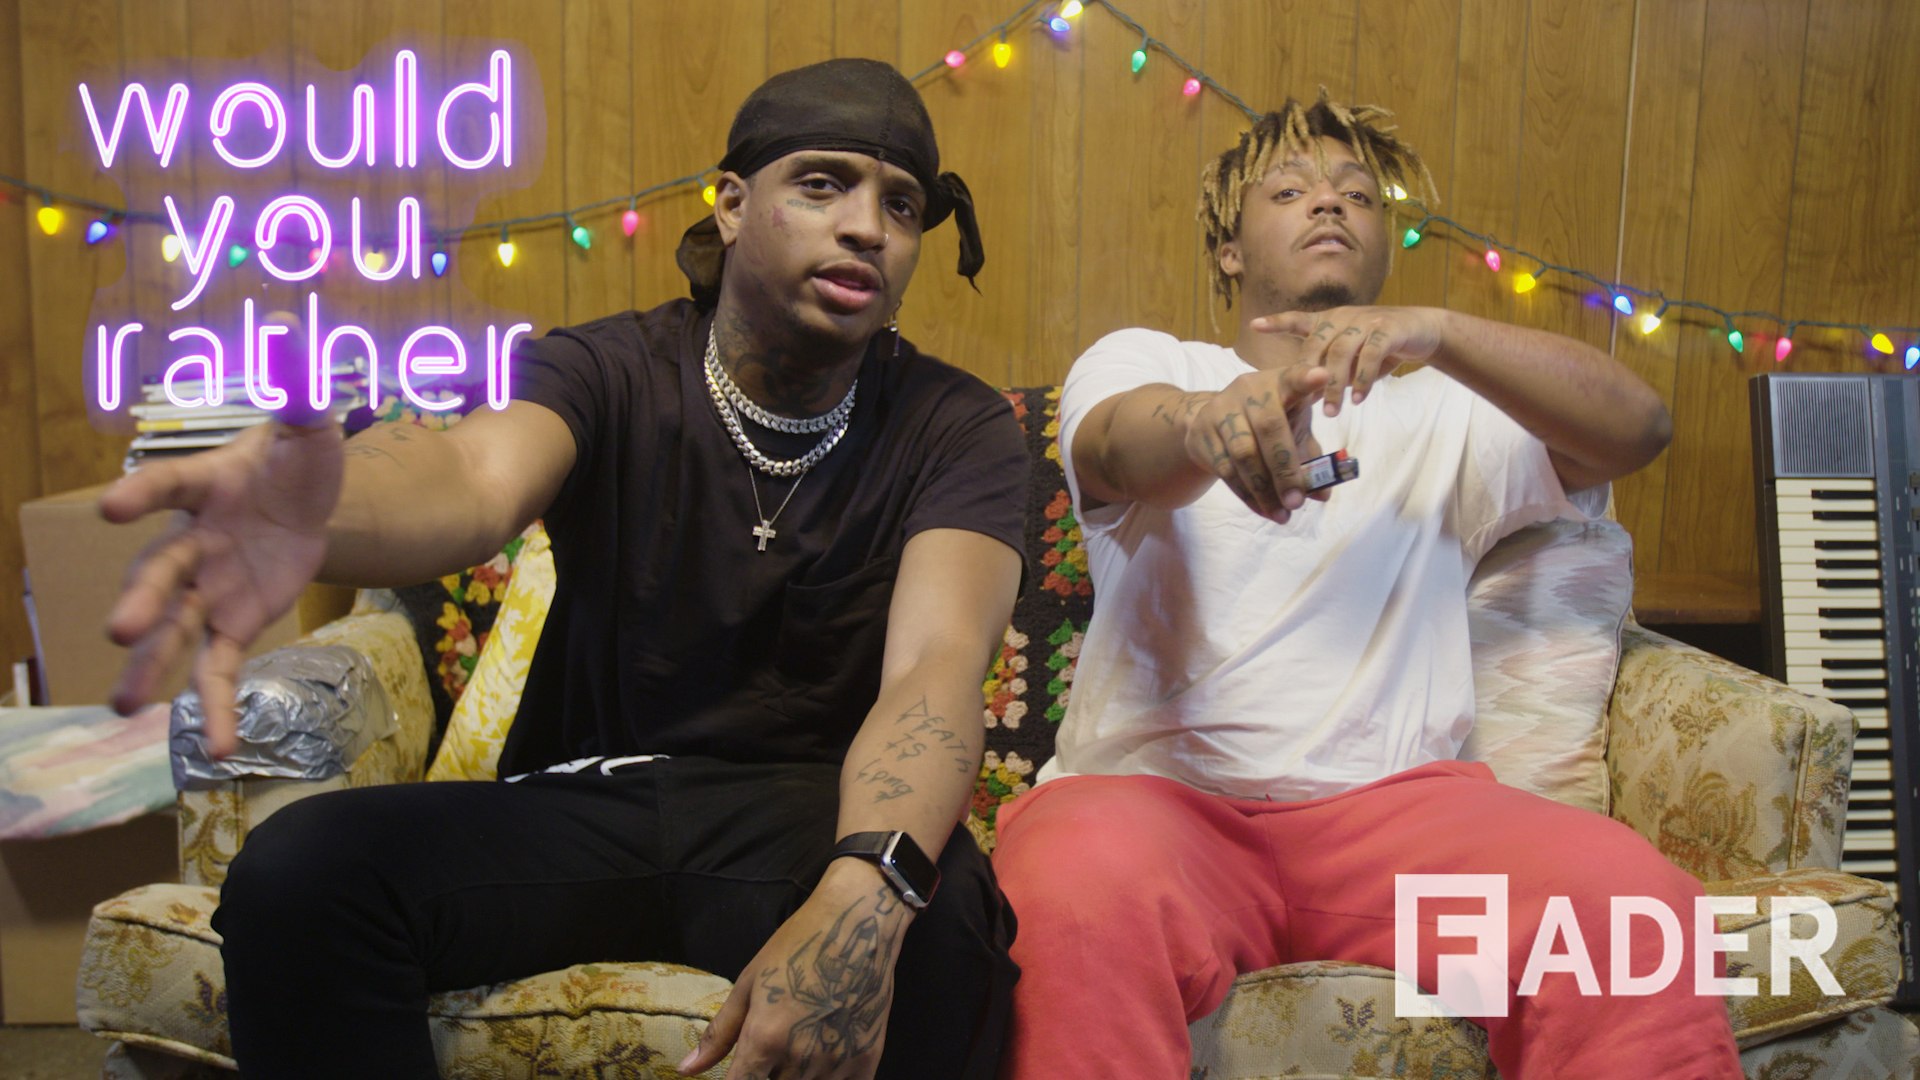 the Slump God Juice WRLD get on 'Would You Rather' - video Dailymotion